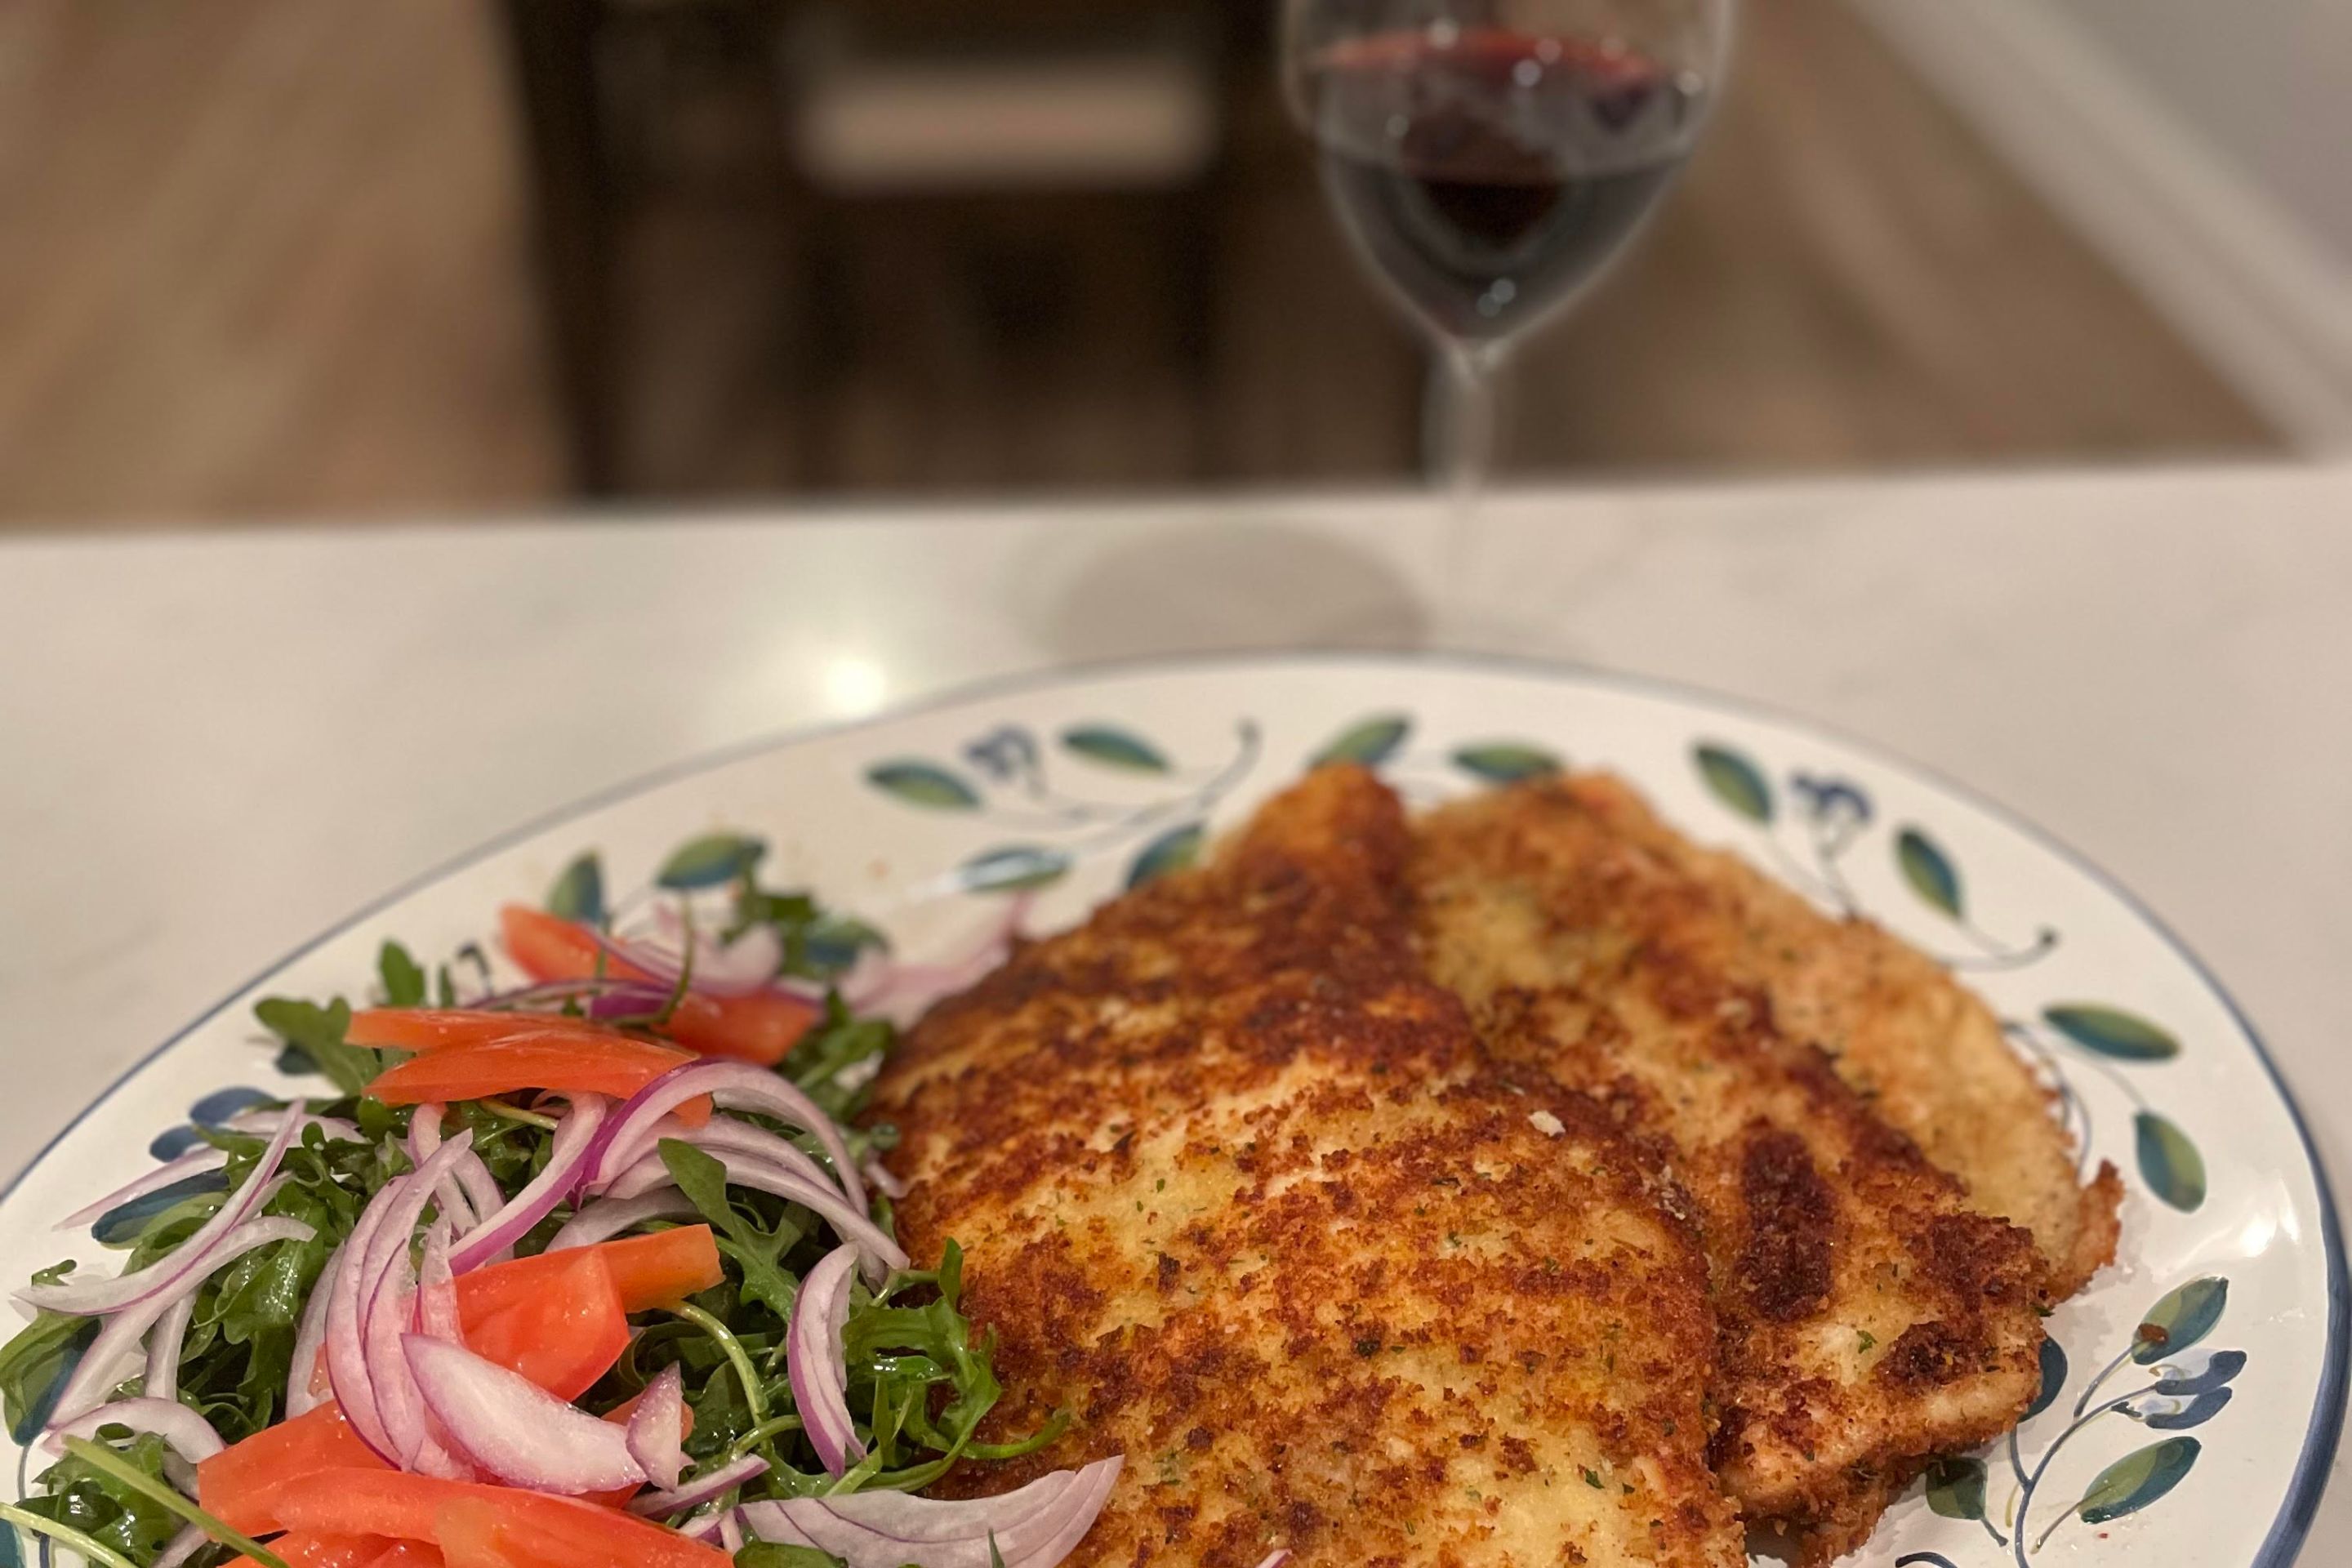 Chicken cutlets on a plate with a salad